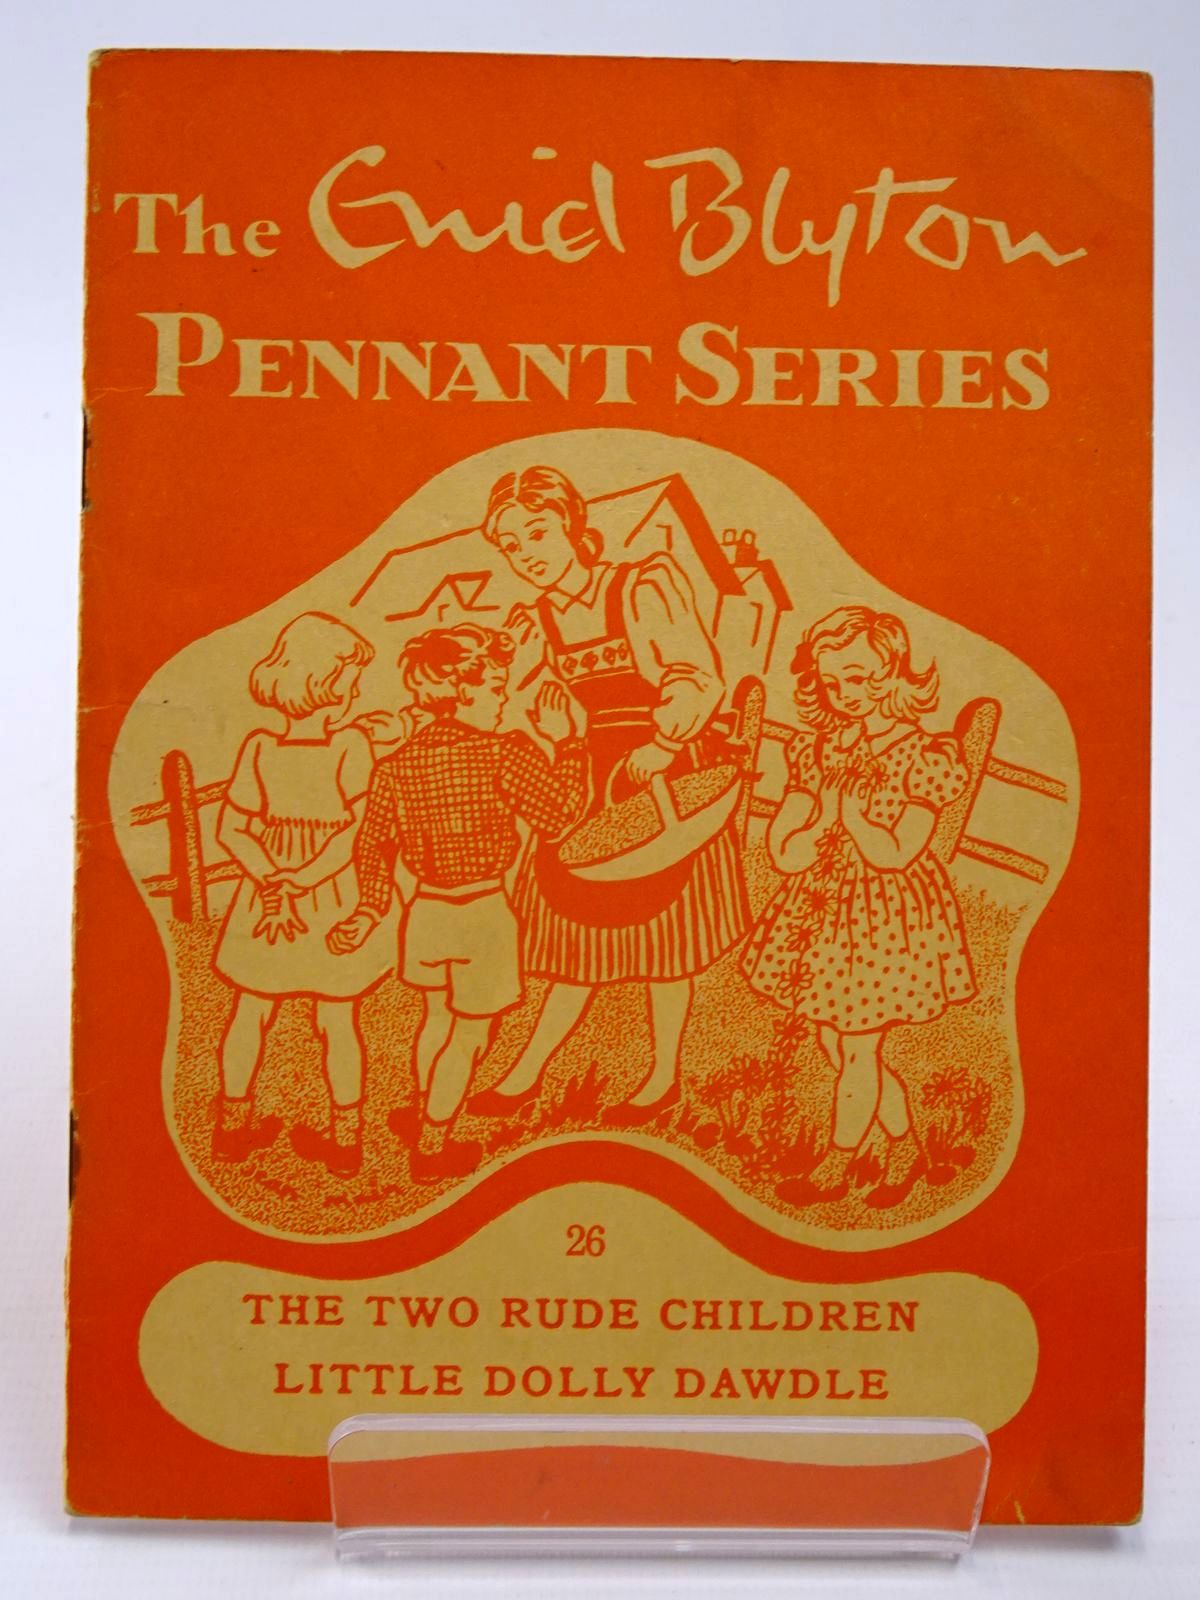 Photo of THE ENID BLYTON PENNANT SERIES No. 26 THE TWO RUDE CHILDREN / LITTLE DOLLY DAWDLE written by Blyton, Enid illustrated by Soper, Eileen Main, Jean published by Macmillan &amp; Co. Ltd. (STOCK CODE: 2130515)  for sale by Stella & Rose's Books